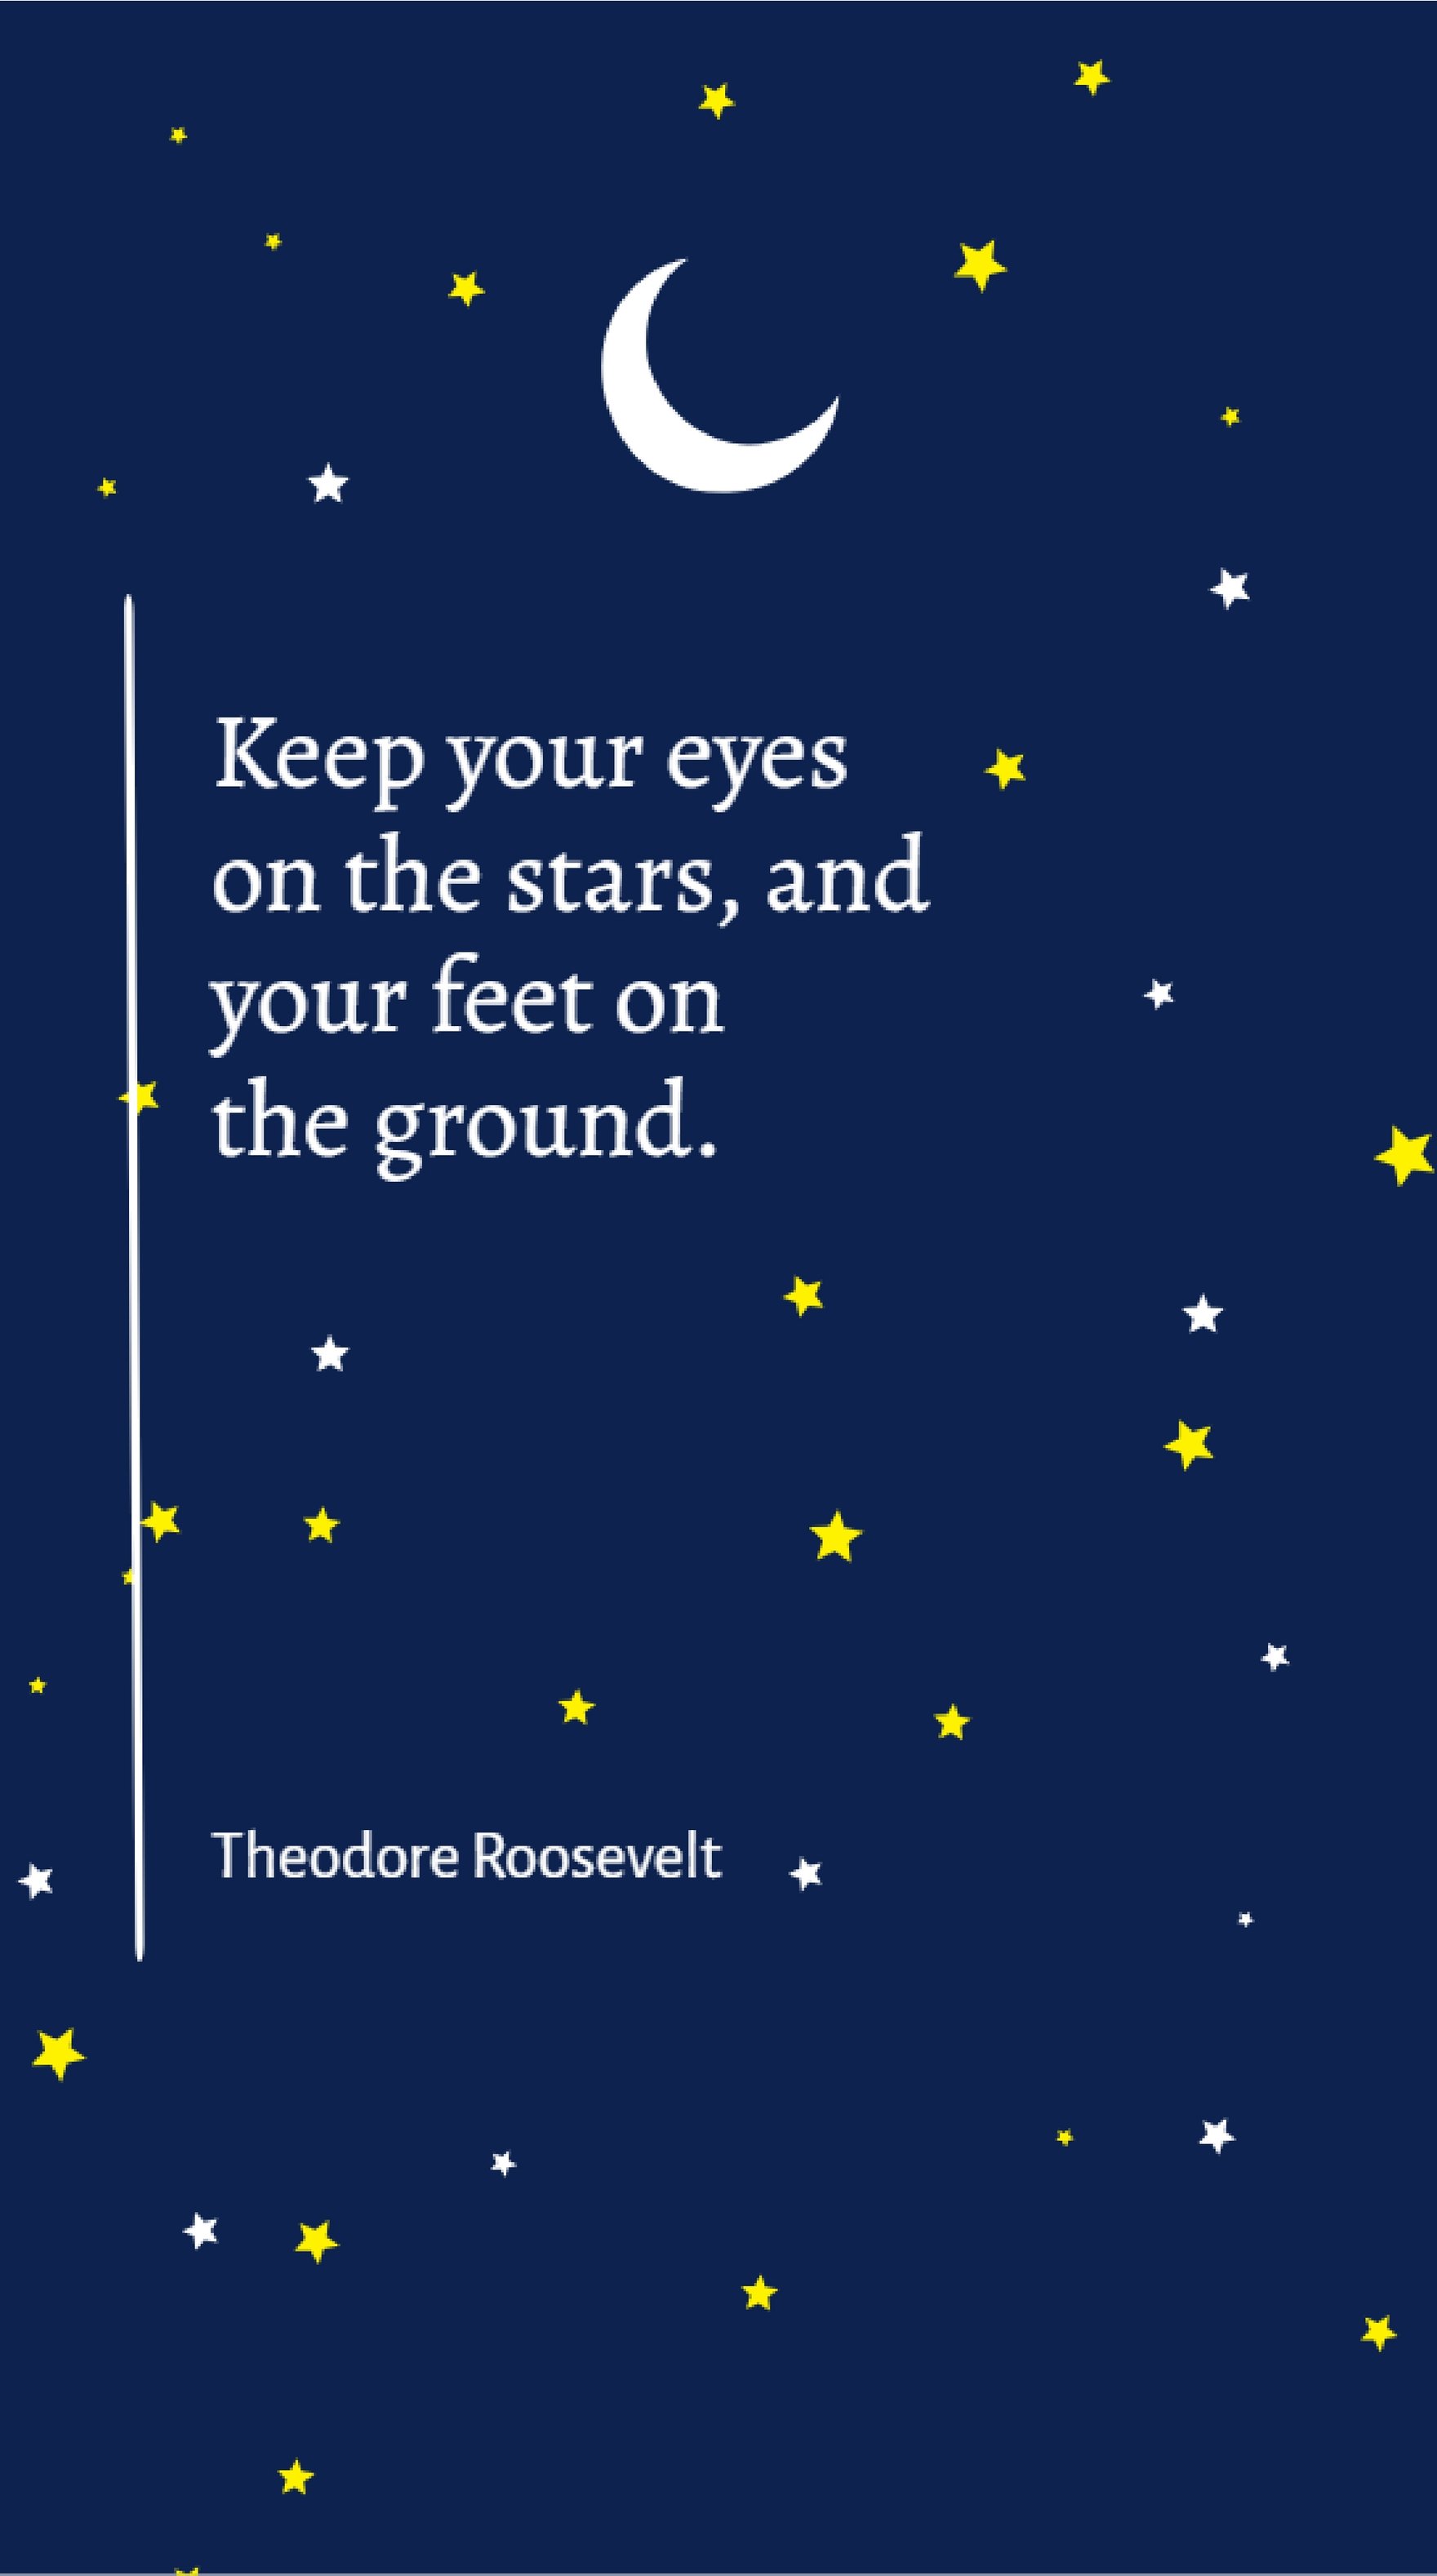 Theodore Roosevelt - Keep your eyes on the stars, and your feet on the ground.